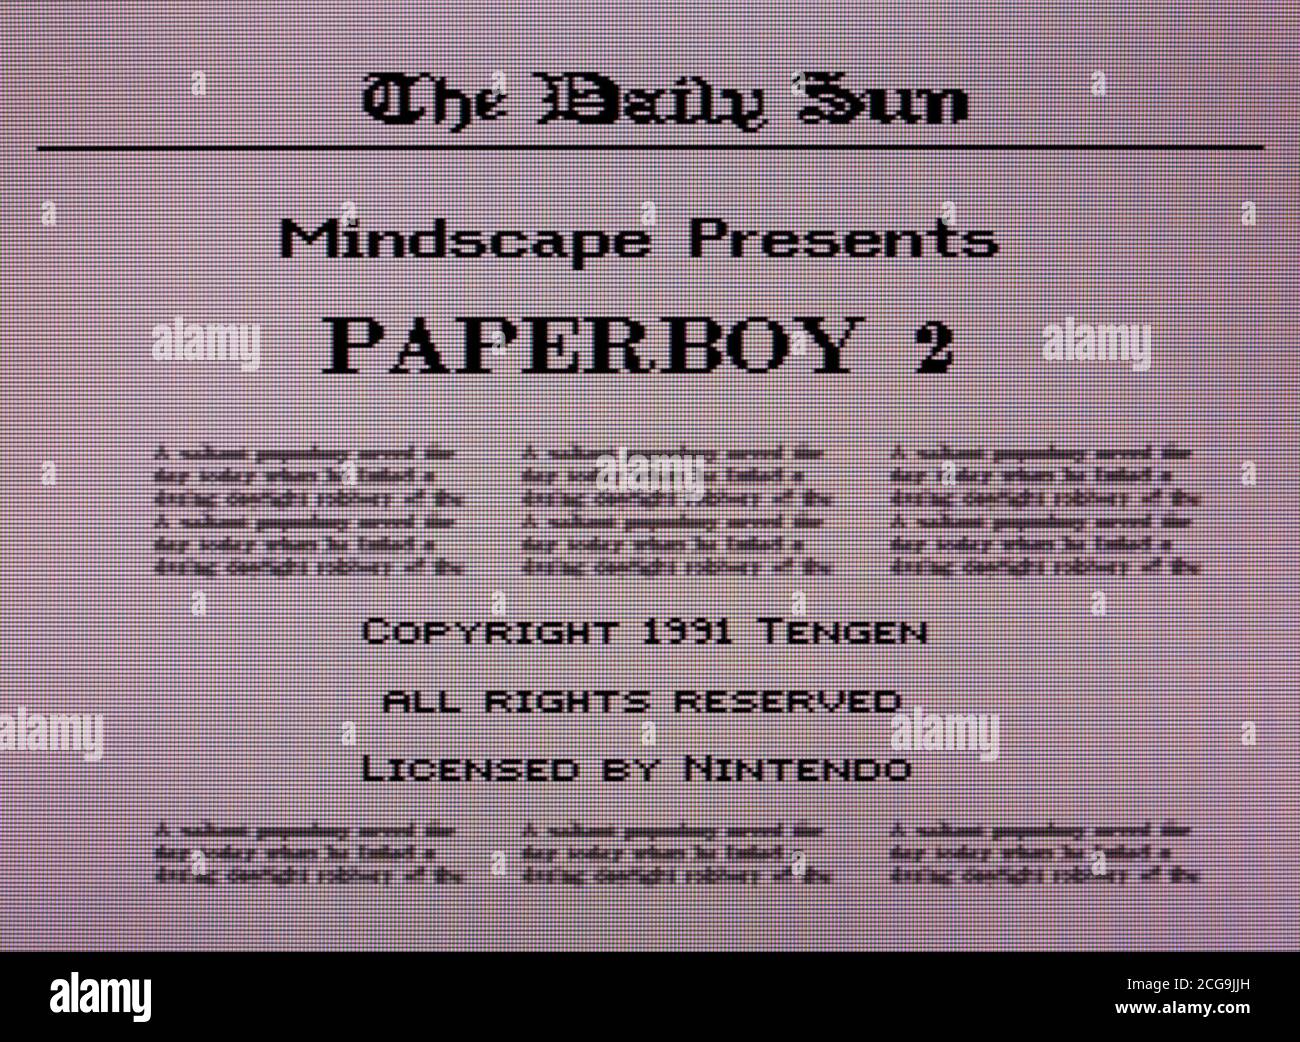 Paperboy 2 - Nintendo Entertainment System - NES Videogame - Editorial use only Stock Photo